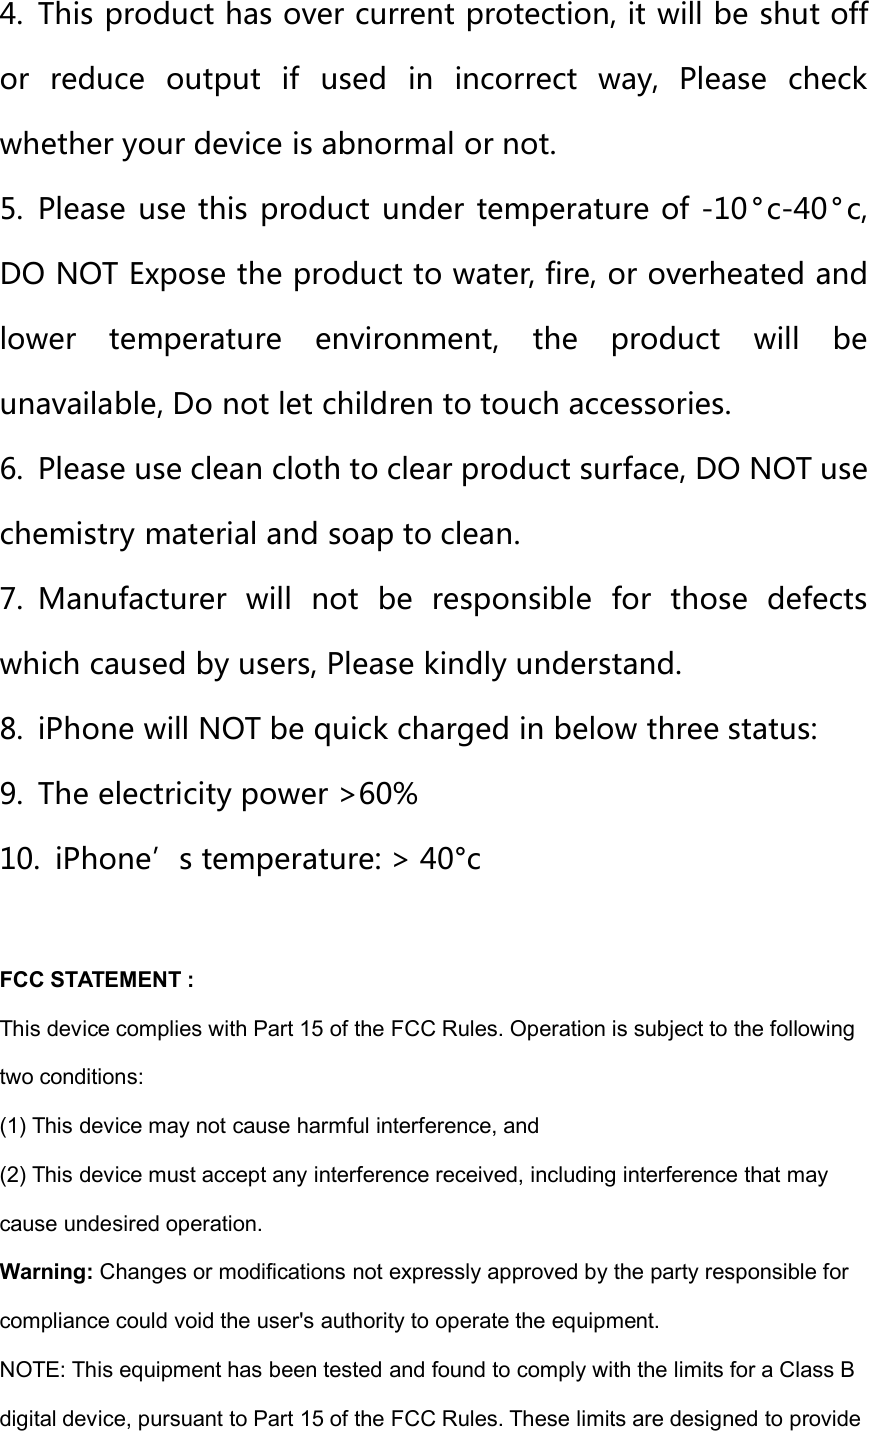 4. This product has over current protection, it will be shut offor reduce output if used in incorrect way, Please checkwhether your device is abnormal or not.5. Please use this product under temperature of -10 °c-40° c,DO NOT Expose the product to water, fire, or overheated andlower temperature environment, the product will beunavailable, Do not let children to touch accessories.6. Please use clean cloth to clear product surface, DO NOT usechemistry material and soap to clean.7. Manufacturer will not be responsible for those defectswhich caused by users, Please kindly understand.8. iPhone will NOT be quick charged in below three status:9. The electricity power &gt;60%10. iPhone’s temperature: &gt; 40°cFCC STATEMENT :This device complies with Part 15 of the FCC Rules. Operation is subject to the followingtwo conditions:(1) This device may not cause harmful interference, and(2) This device must accept any interference received, including interference that maycause undesired operation.Warning: Changes or modifications not expressly approved by the party responsible forcompliance could void the user&apos;s authority to operate the equipment.NOTE: This equipment has been tested and found to comply with the limits for a Class Bdigital device, pursuant to Part 15 of the FCC Rules. These limits are designed to provide